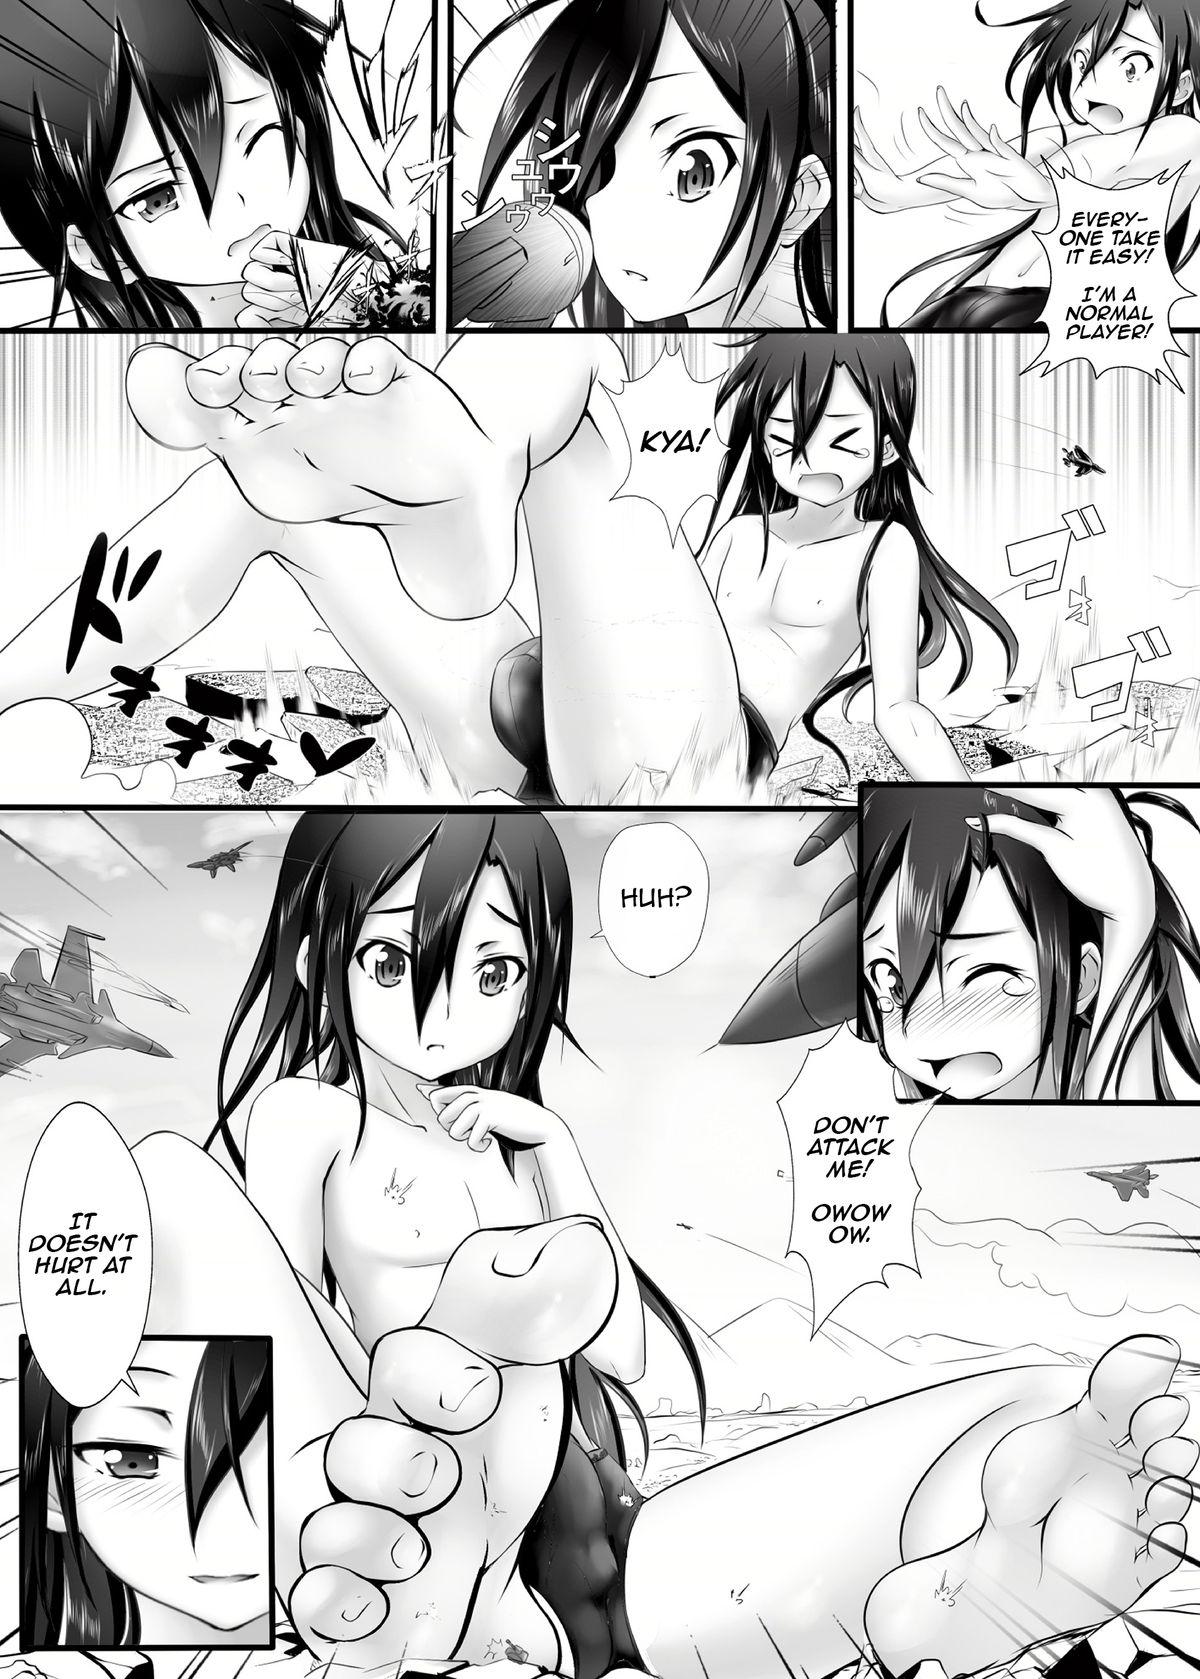 Anal Sex BUG ART ONLINE 1.5 Game Time - Sword art online Leather - Page 6